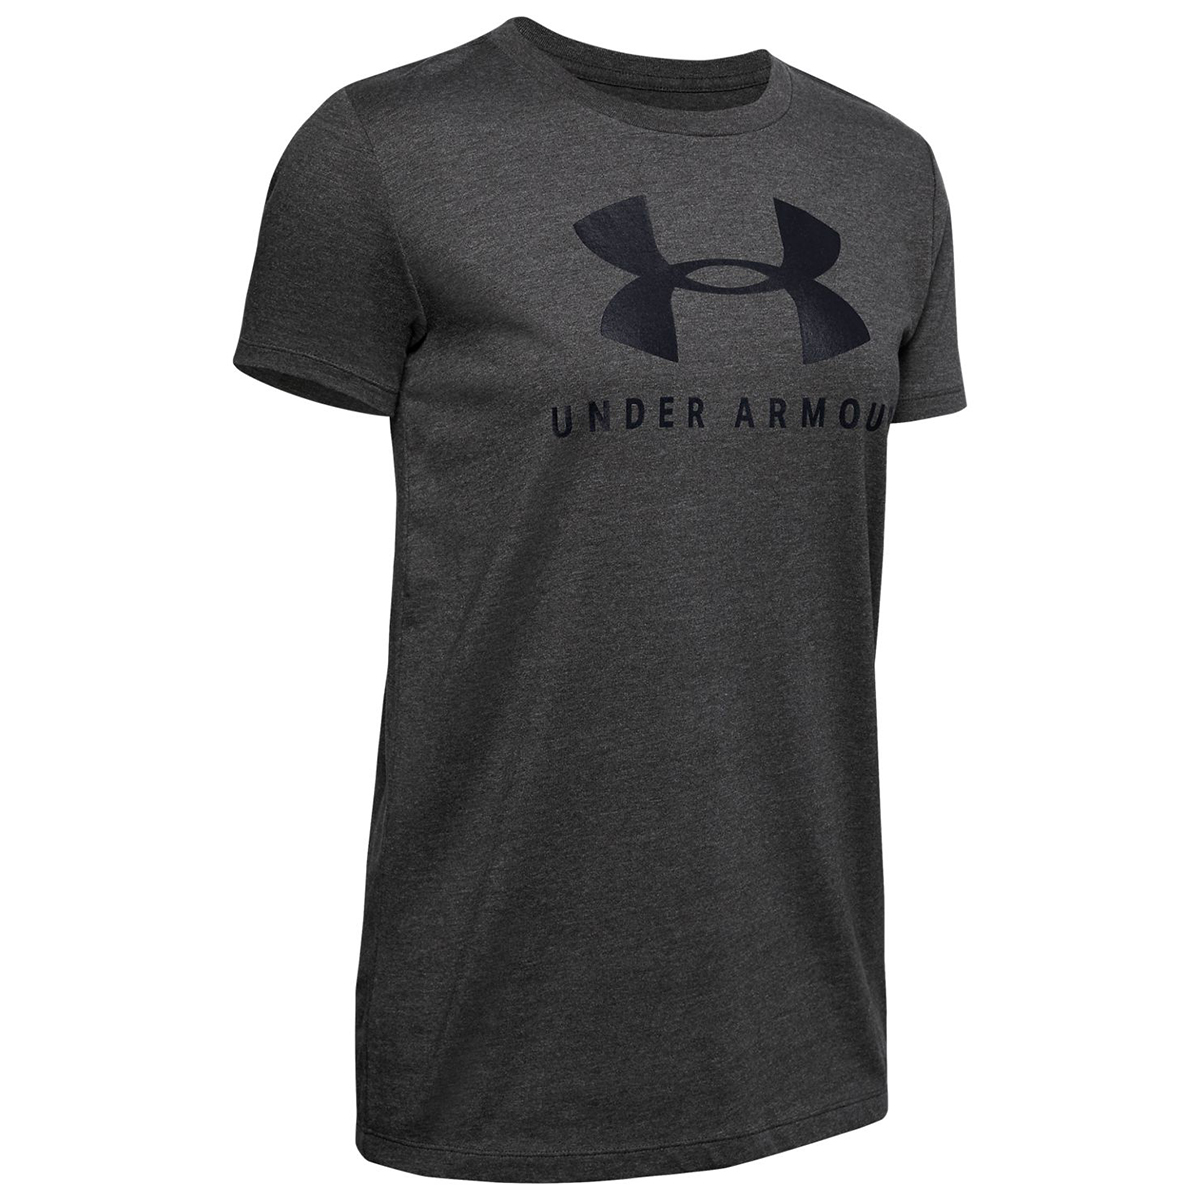 Under Armour Women's Ua Graphic Sportstyle Classic Short-Sleeve Tee